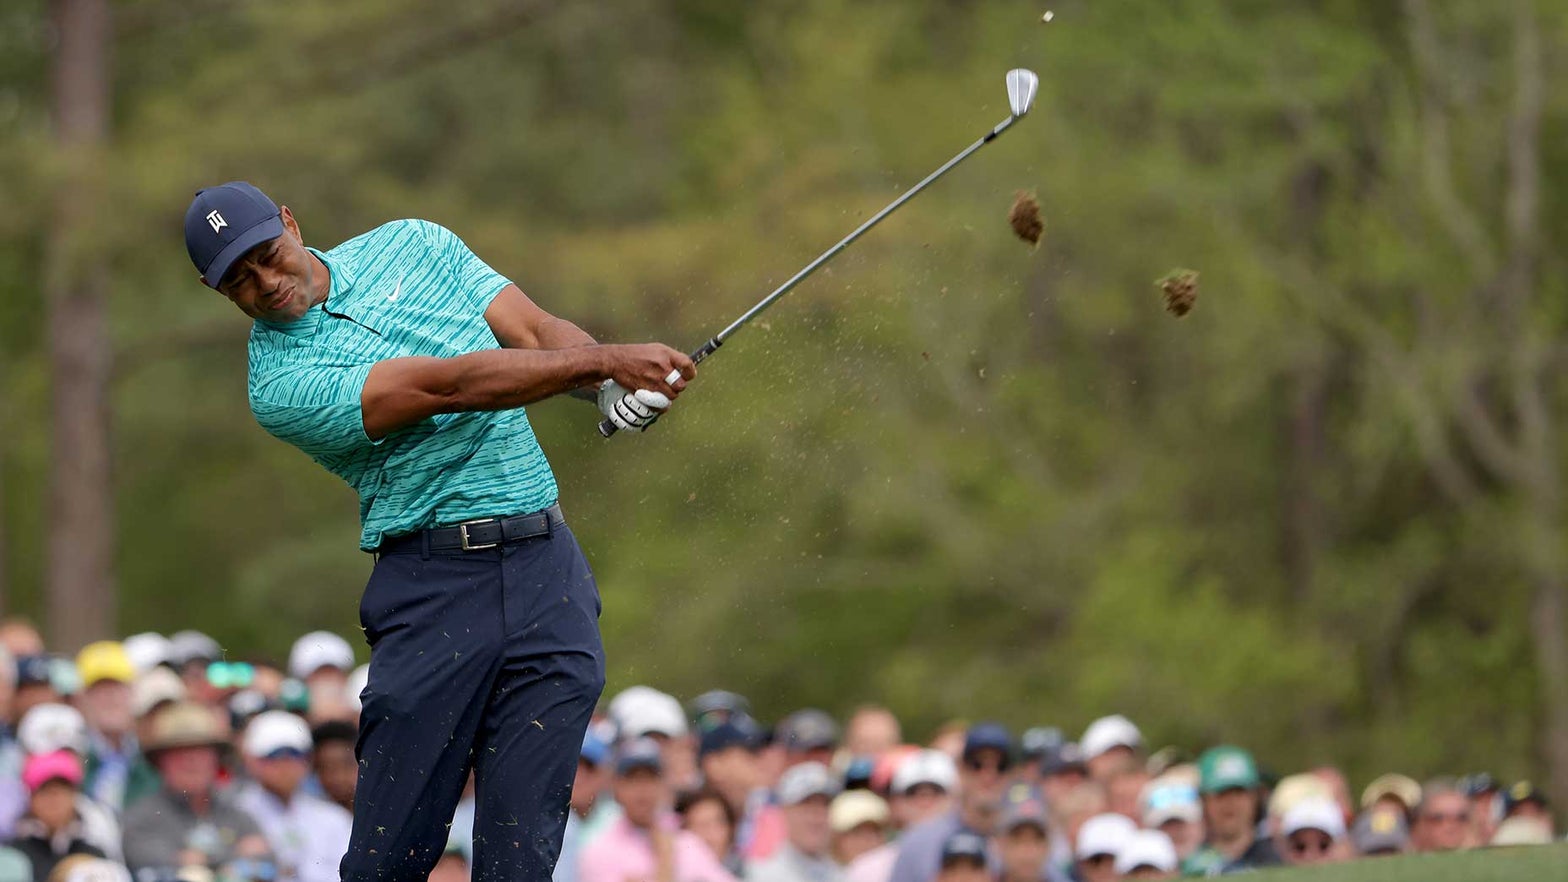 'I have a chance' Tiger Woods makes Masters cut in remarkable return